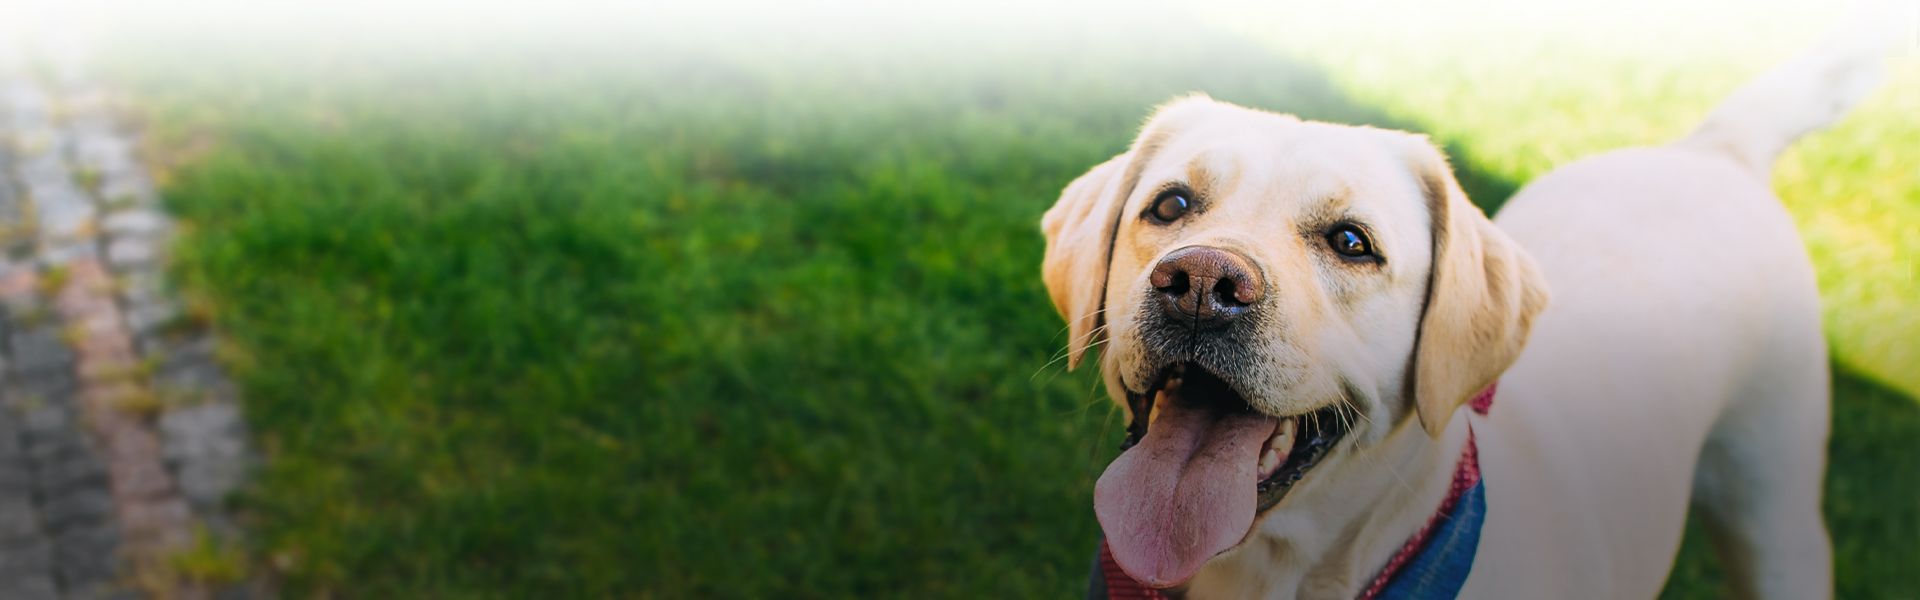 happy labrador dog with tongue sticking out standing on grass with blurred background at veterinary care unlimited